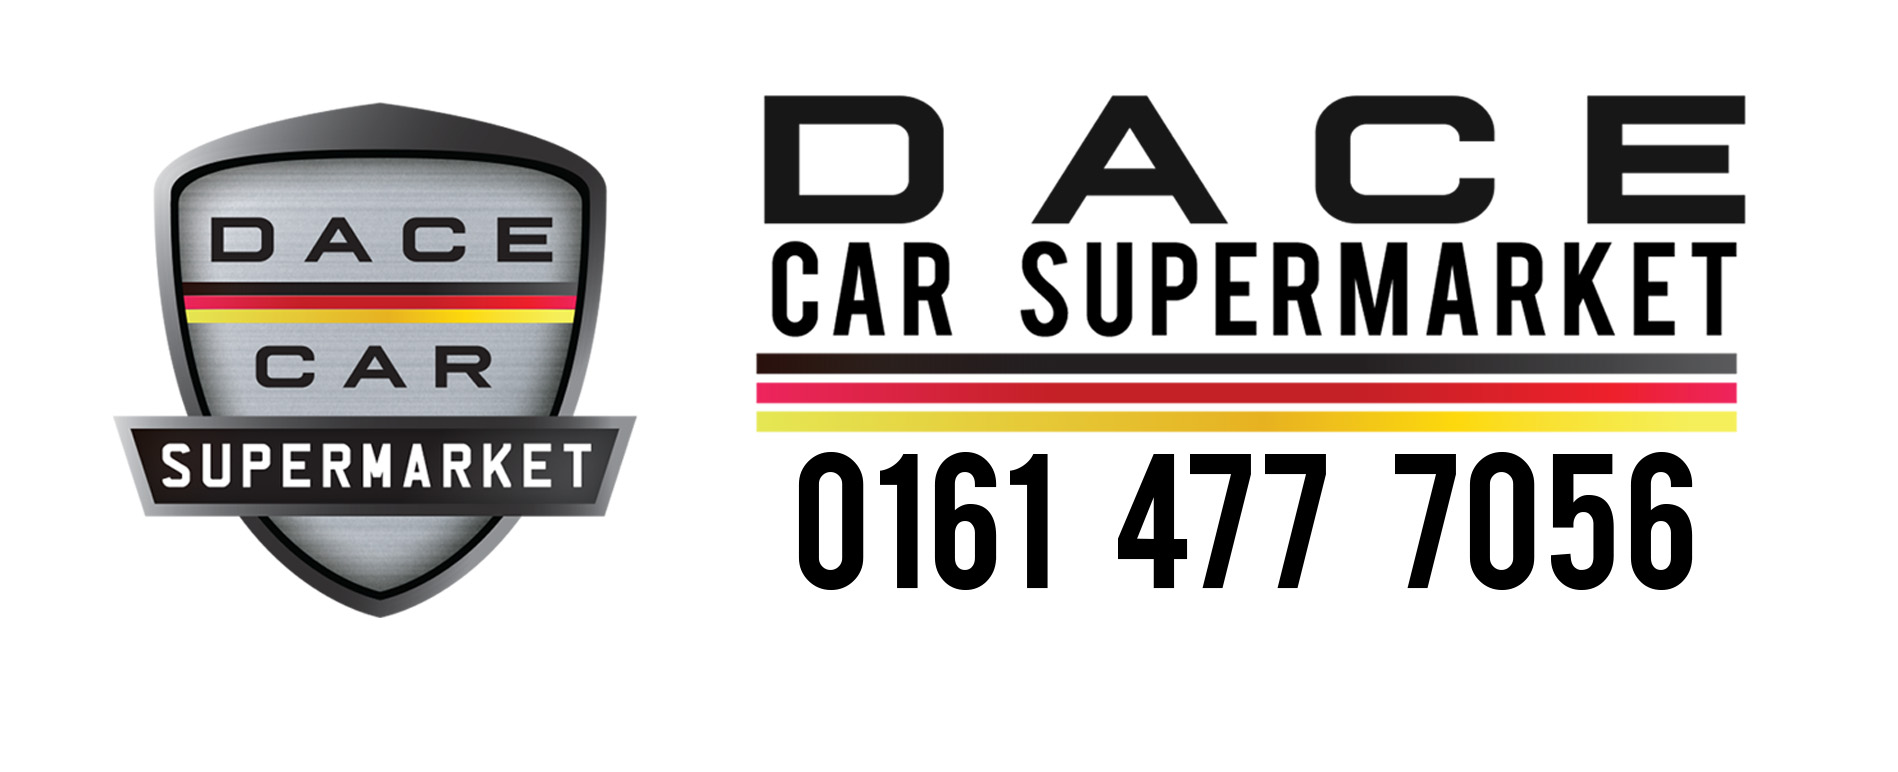 Logo of Dace Car Supermarket Car Dealers - Used In Stockport, Cheshire